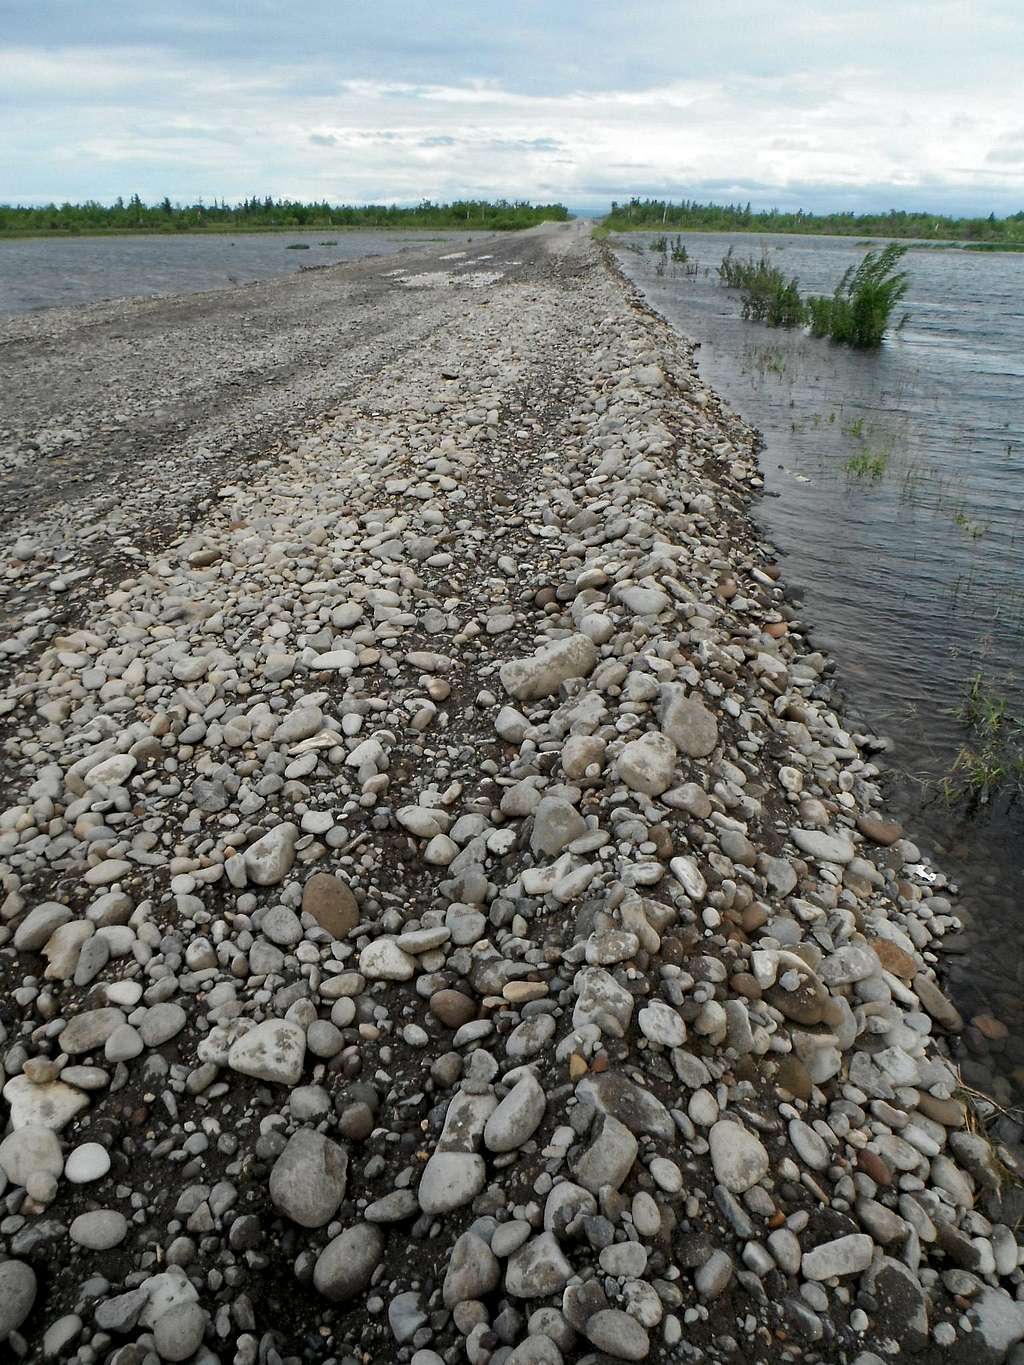 Road after flooding repairs, South of Kozyrevsk.